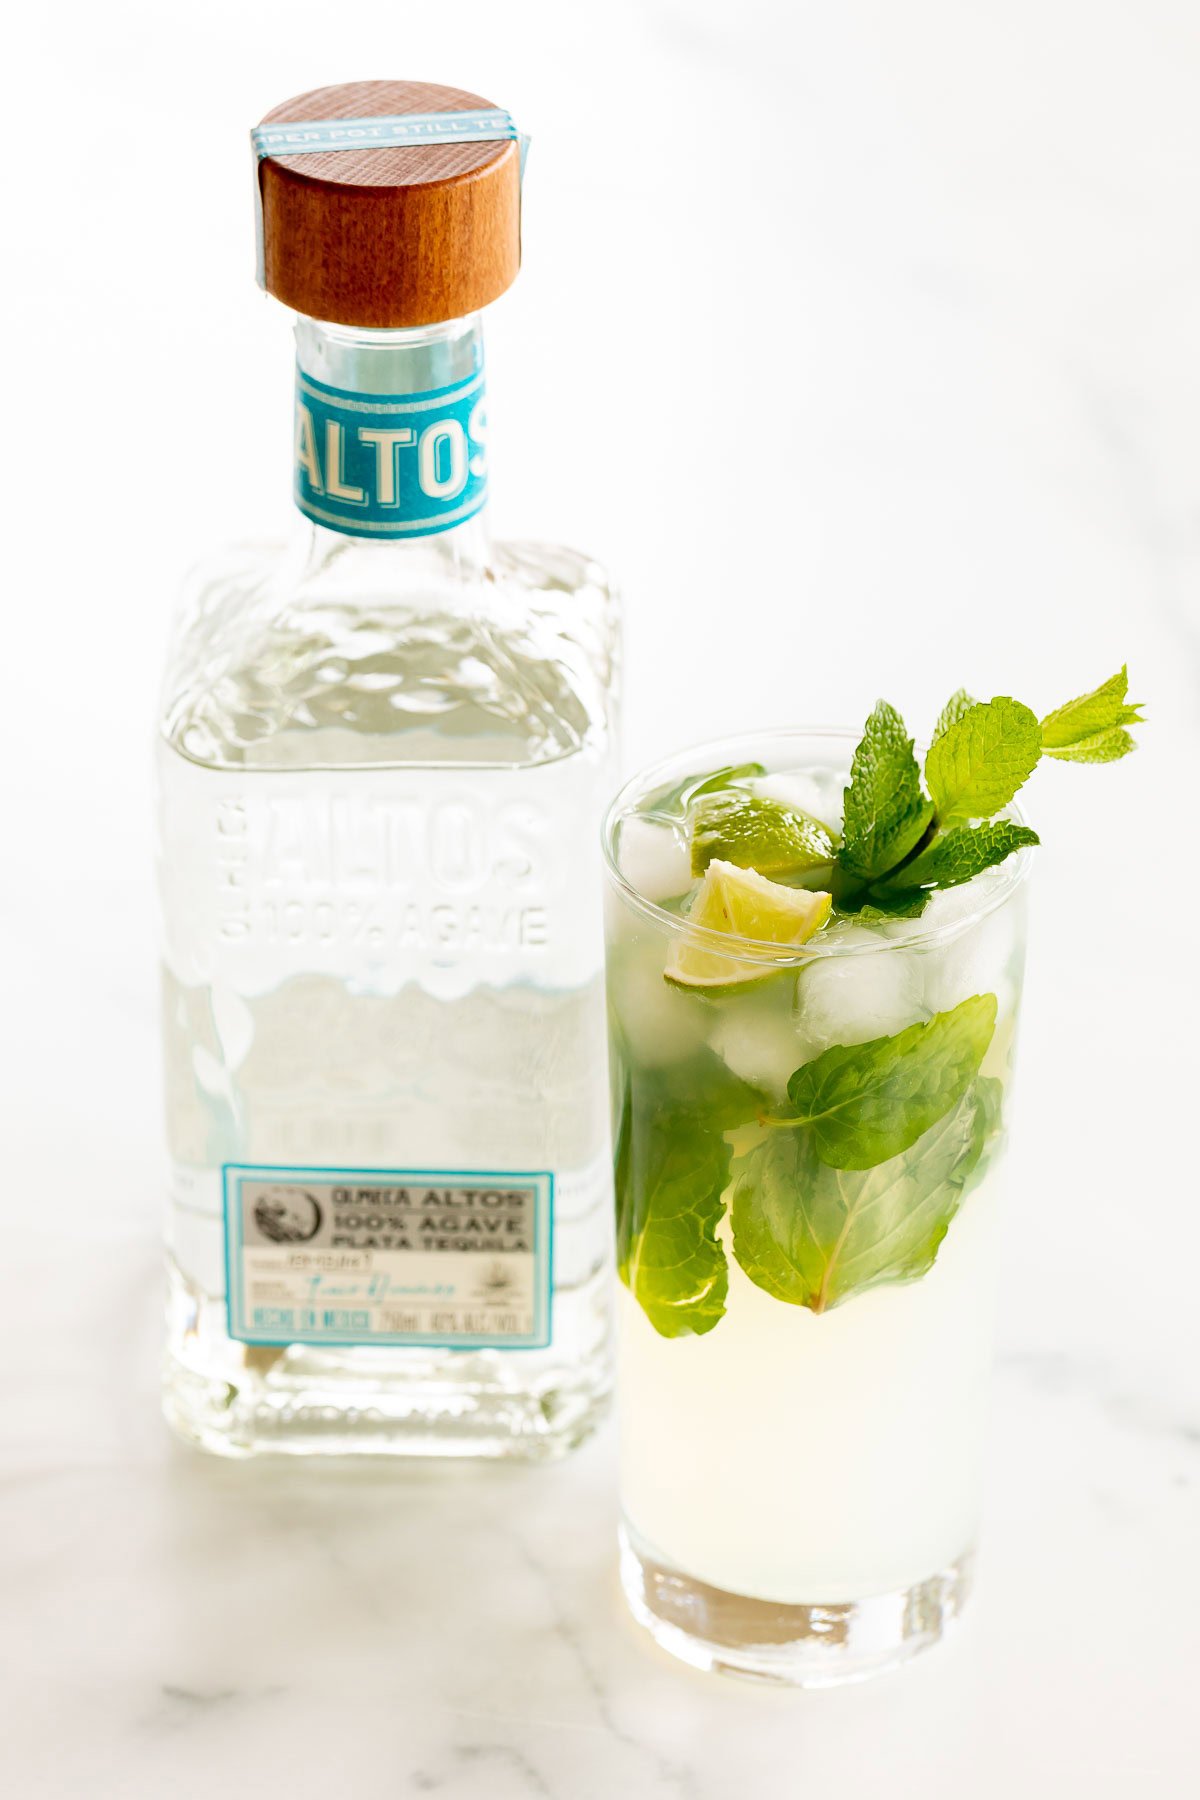 A glass of tequila mojito with lime and mint next to a bottle of Olmeca Altos tequila on a marble surface.